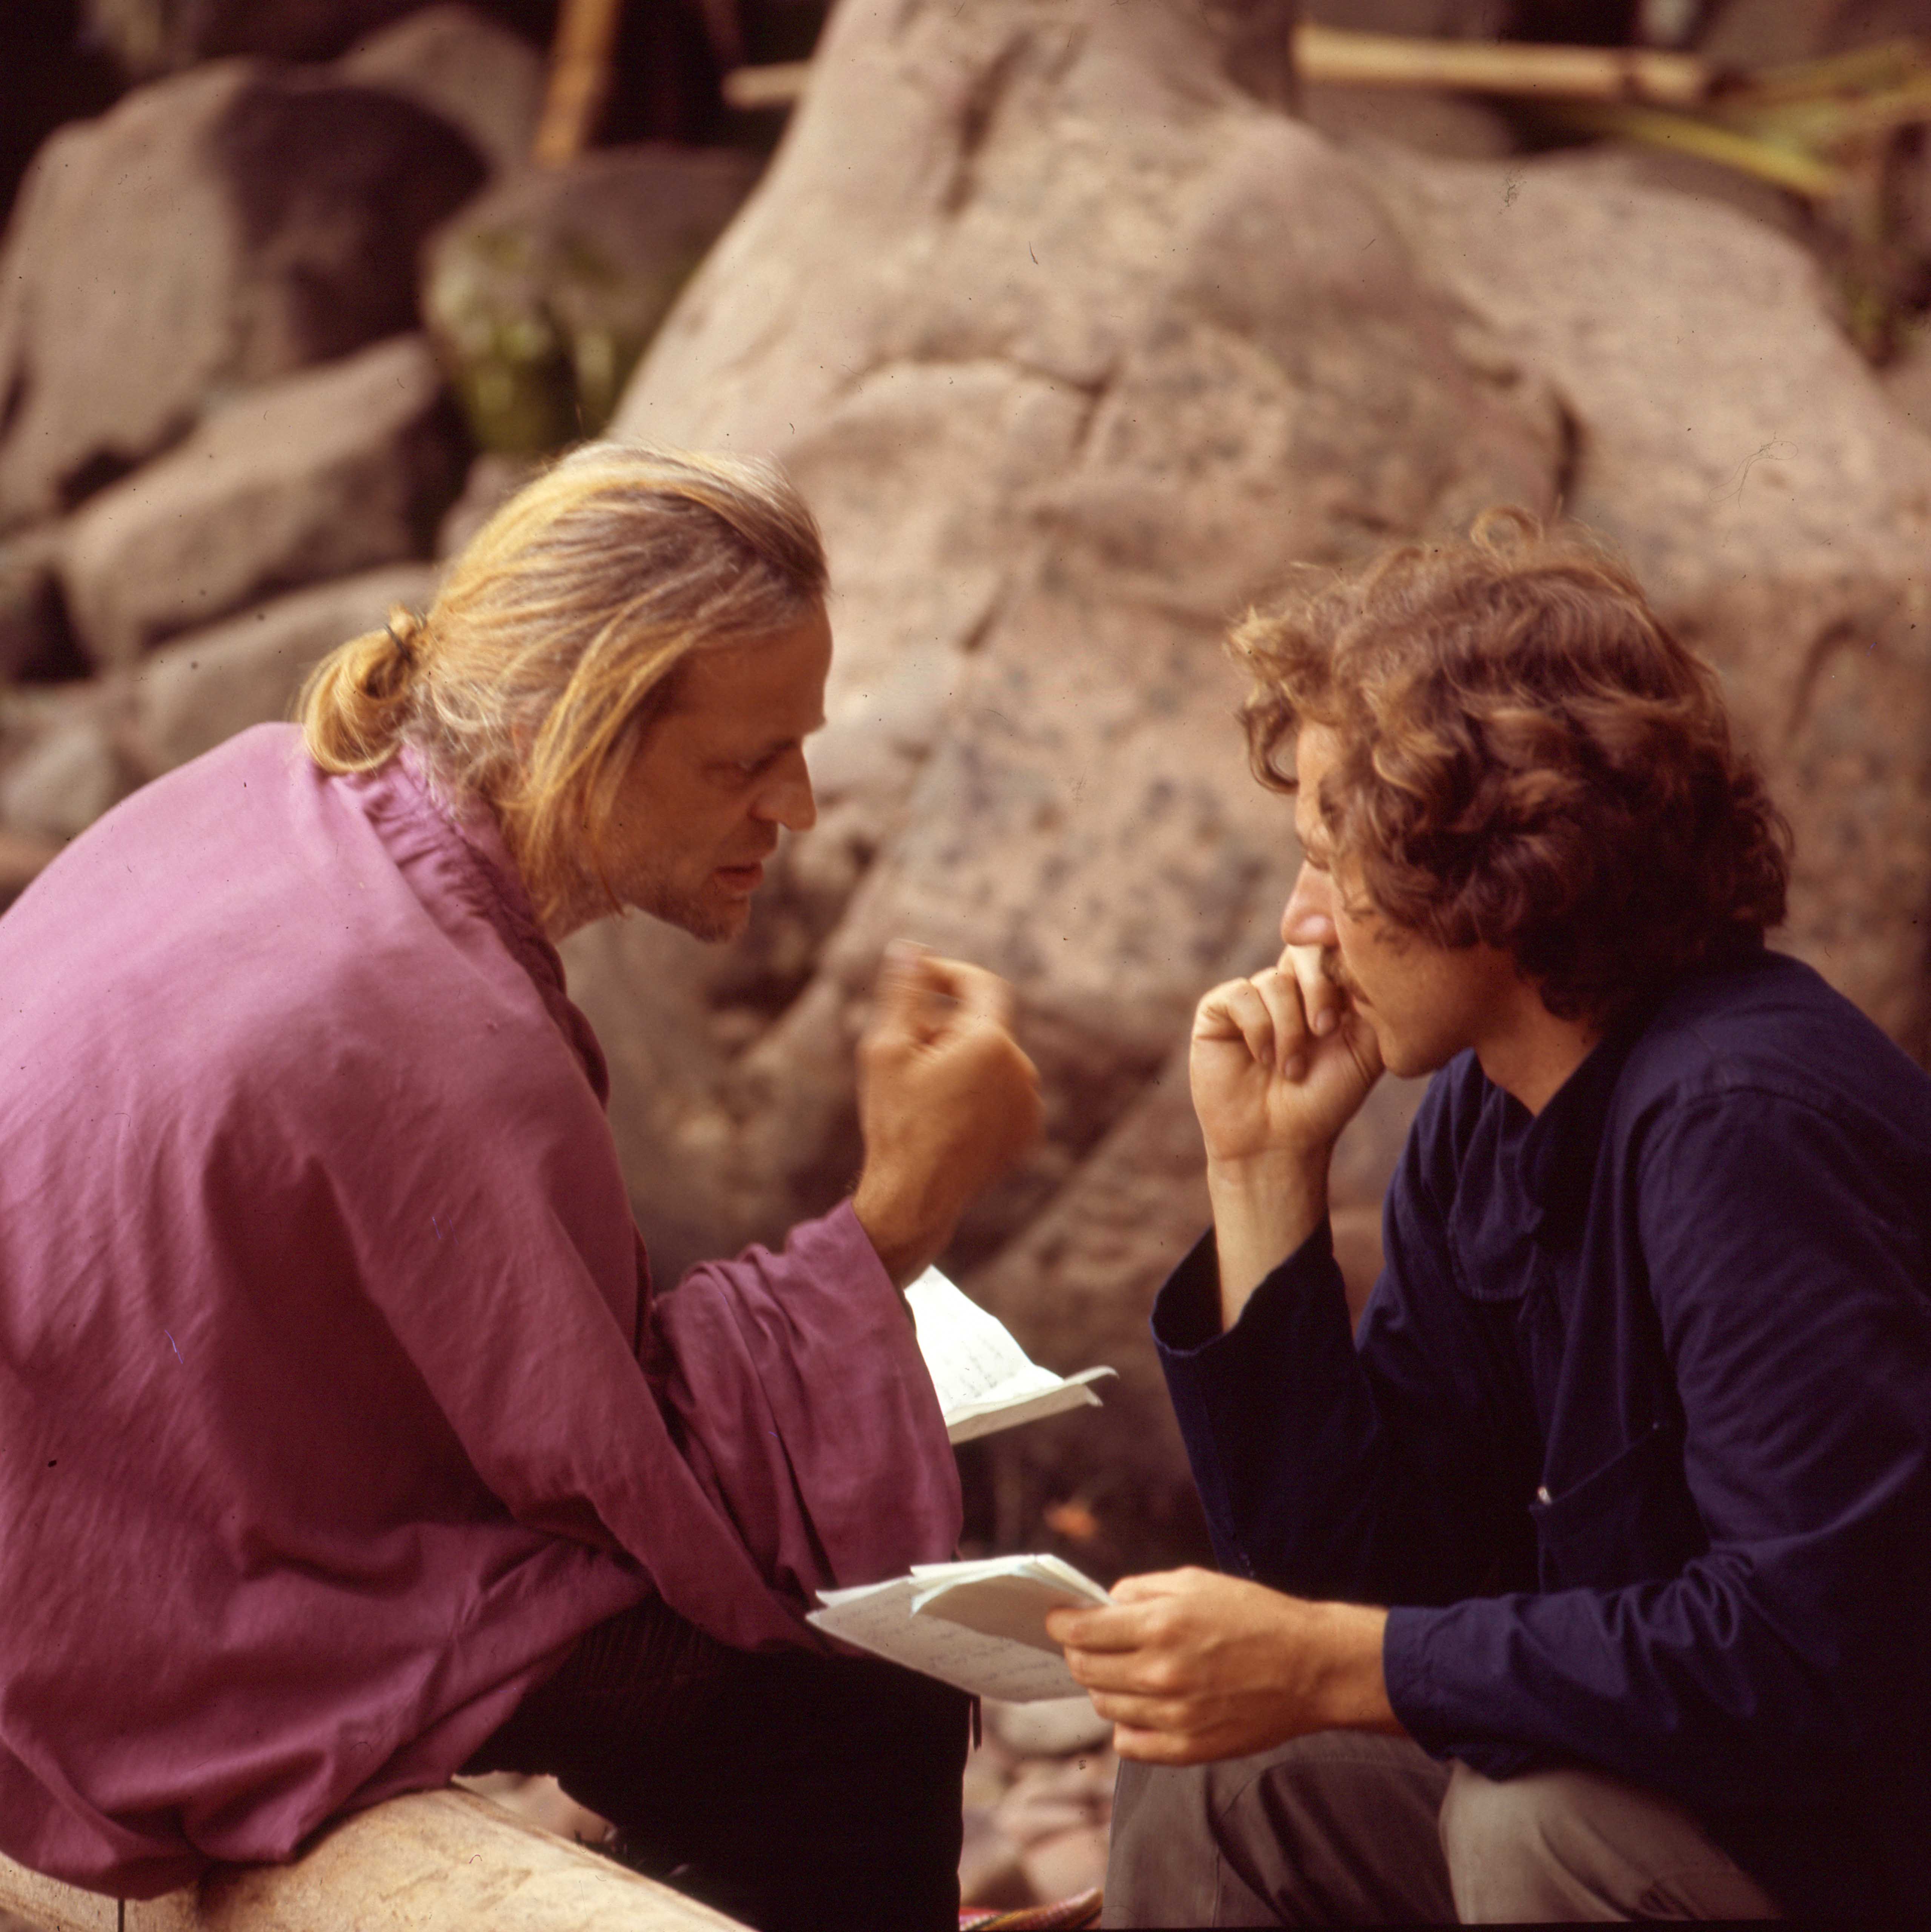 Behind the scenes of the film Aguirre, der Zorn Gottes